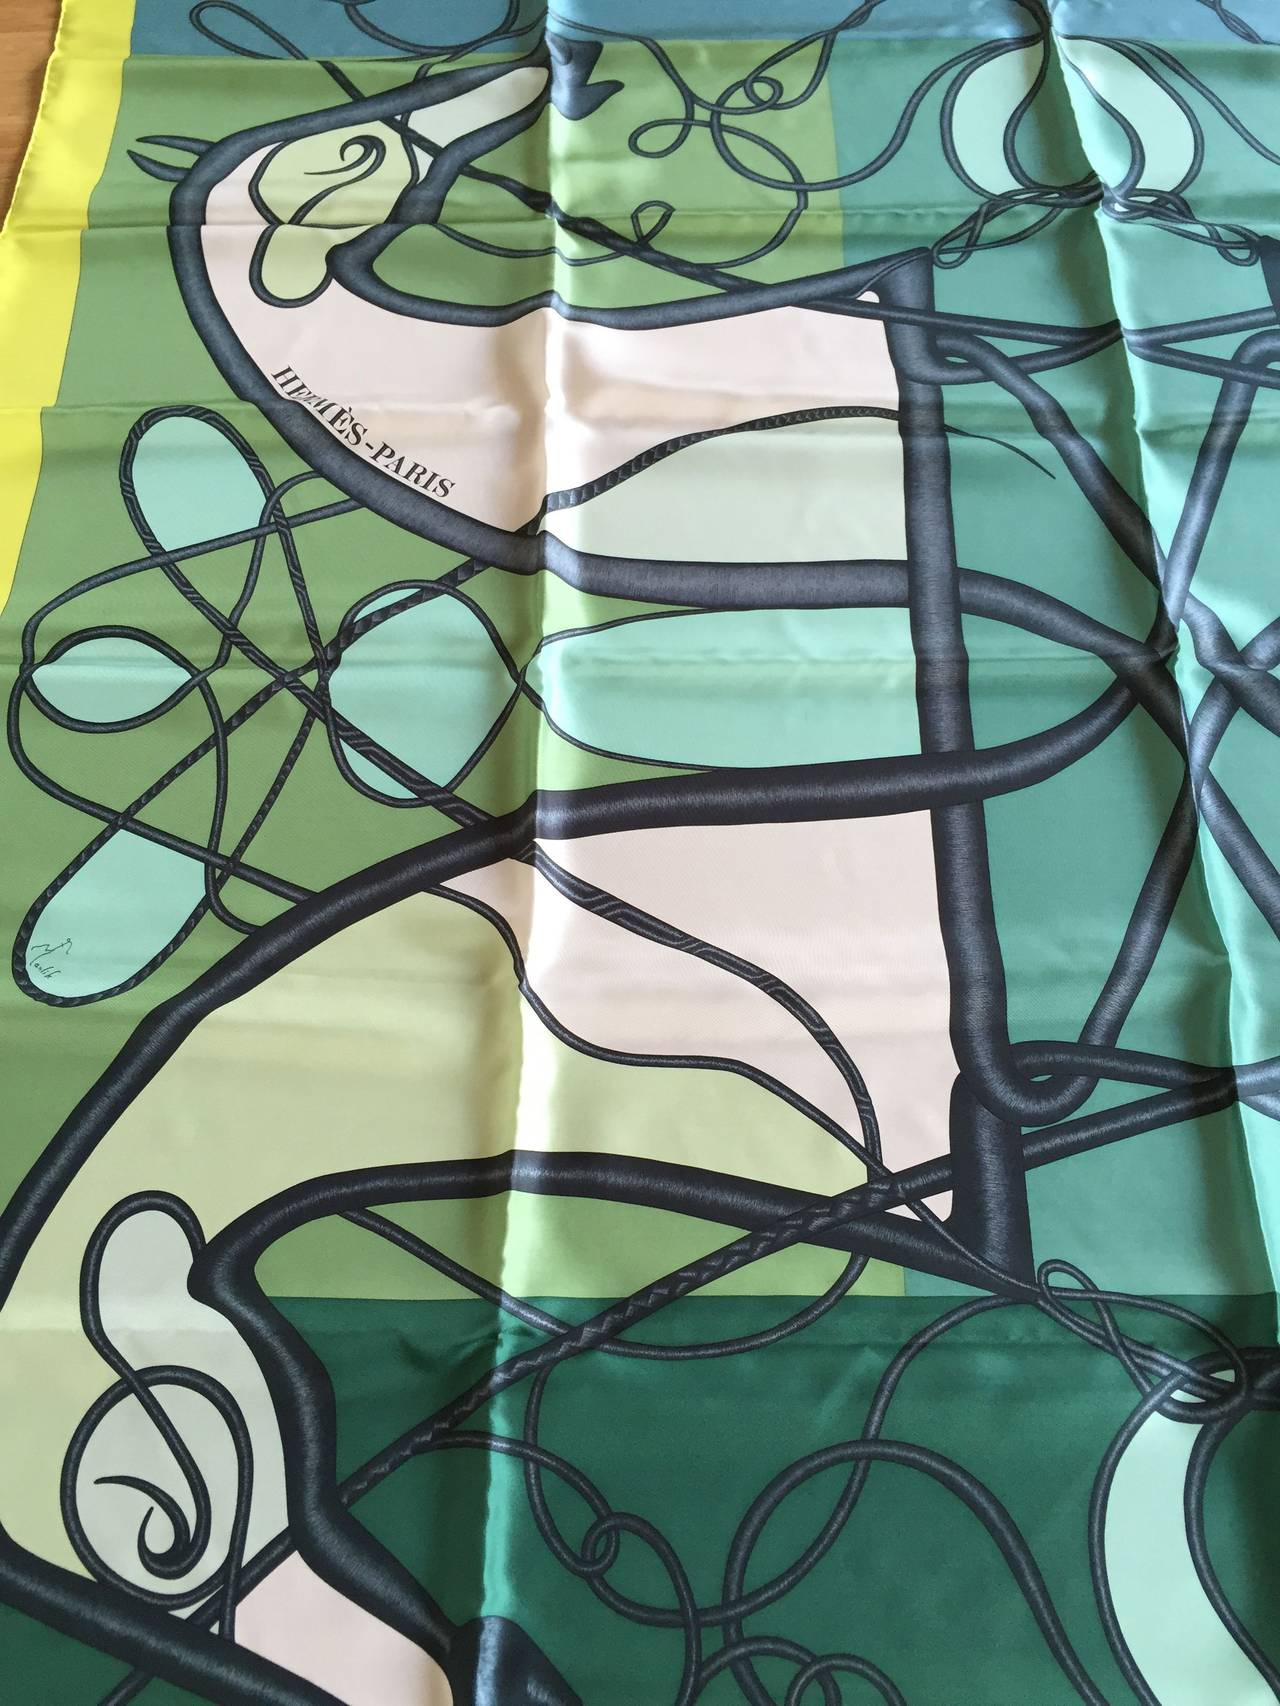 Hermès Coup de Fouet shawl
XL size 
100% Silk 
Green, white, grey tones 

Dimensions : 
140 x 140 cms 
55 x 55 inches

It comes with a Hermes box and silk paper
Retail price : 890 dollars